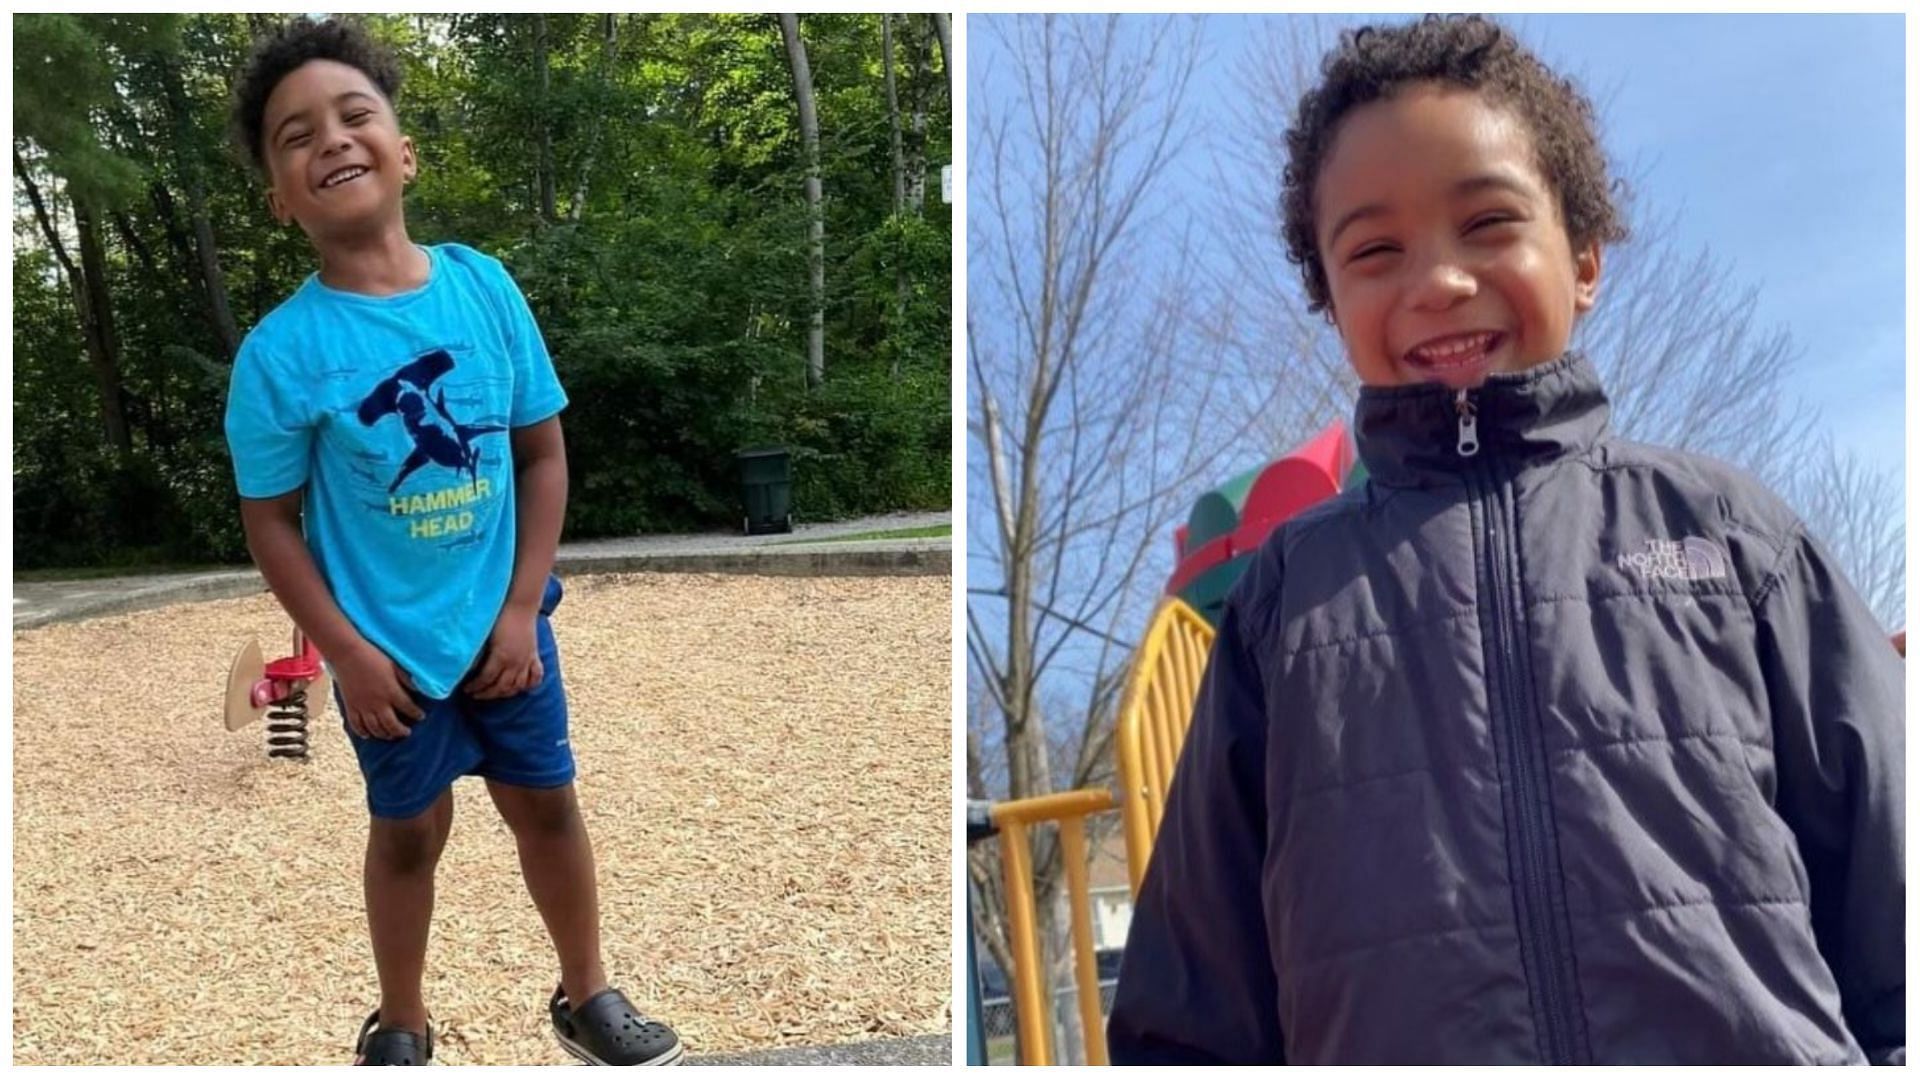 Jaevion Riley succumbed to his injuries after being in the coma for a week, (Images via Kirsten Glavin TV and Anthony J Carignan Sr./Facebook)